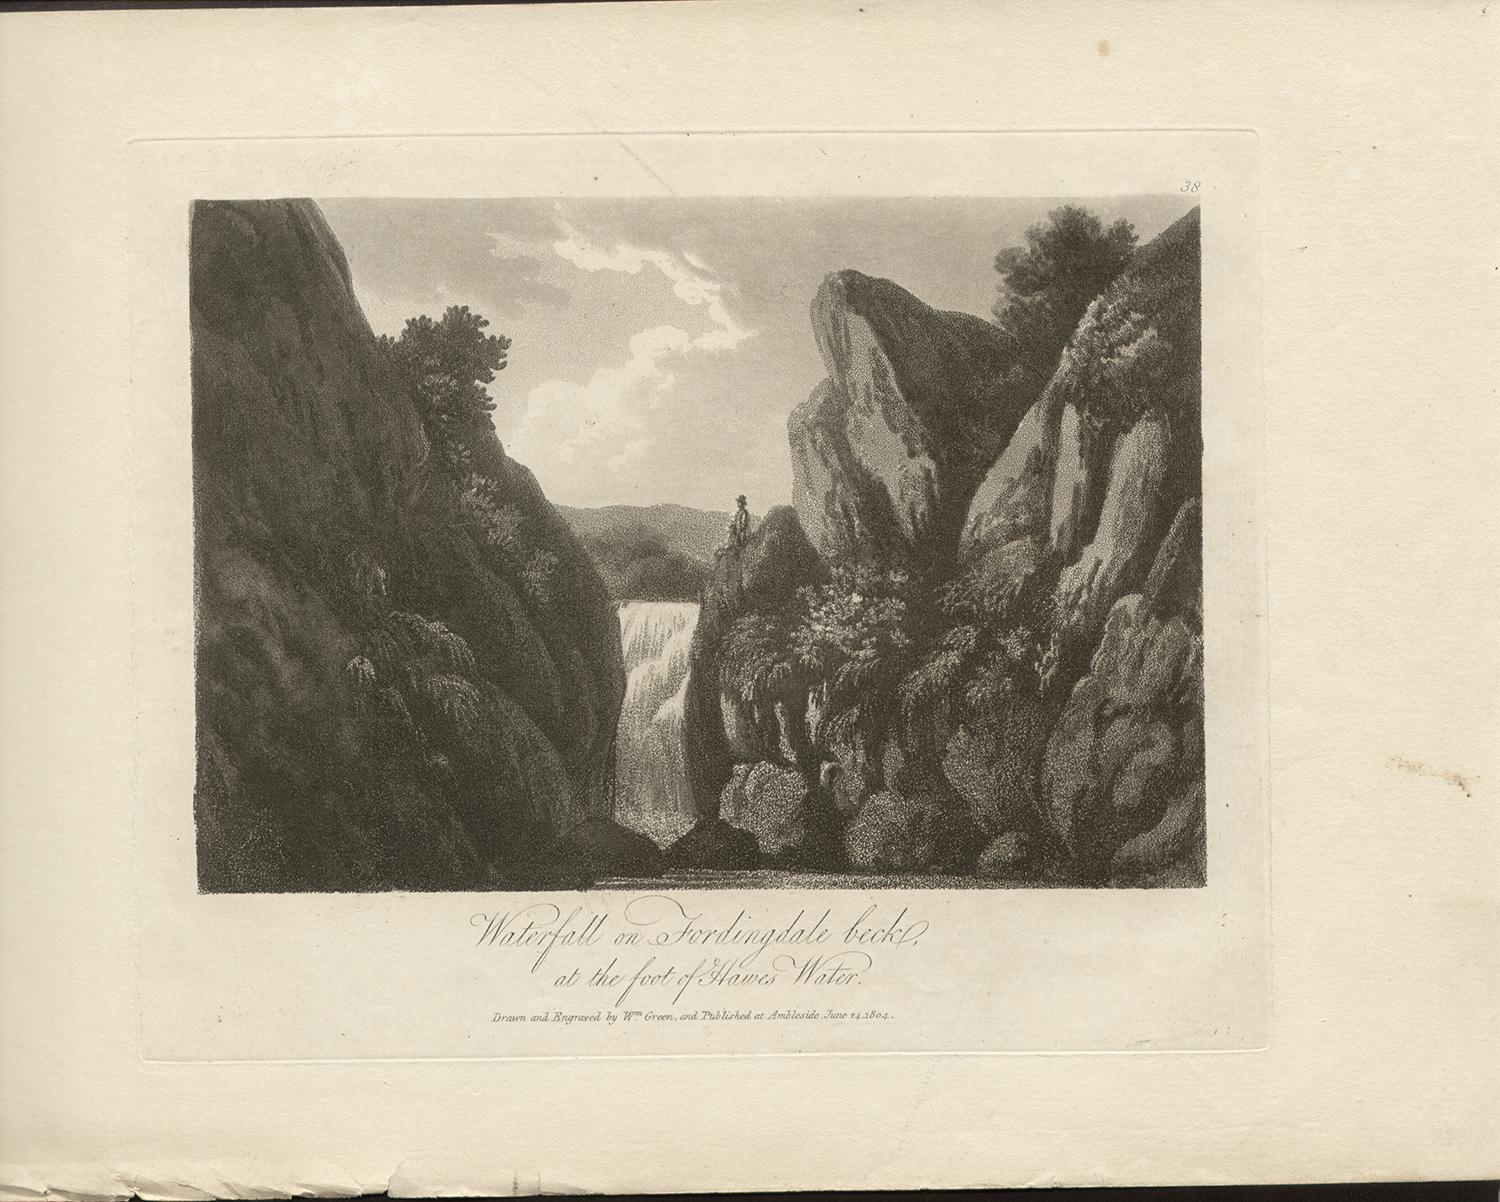 Waterfall on Fordingdale beck, Lake District scenery C19th English aquatint - Print by William Green